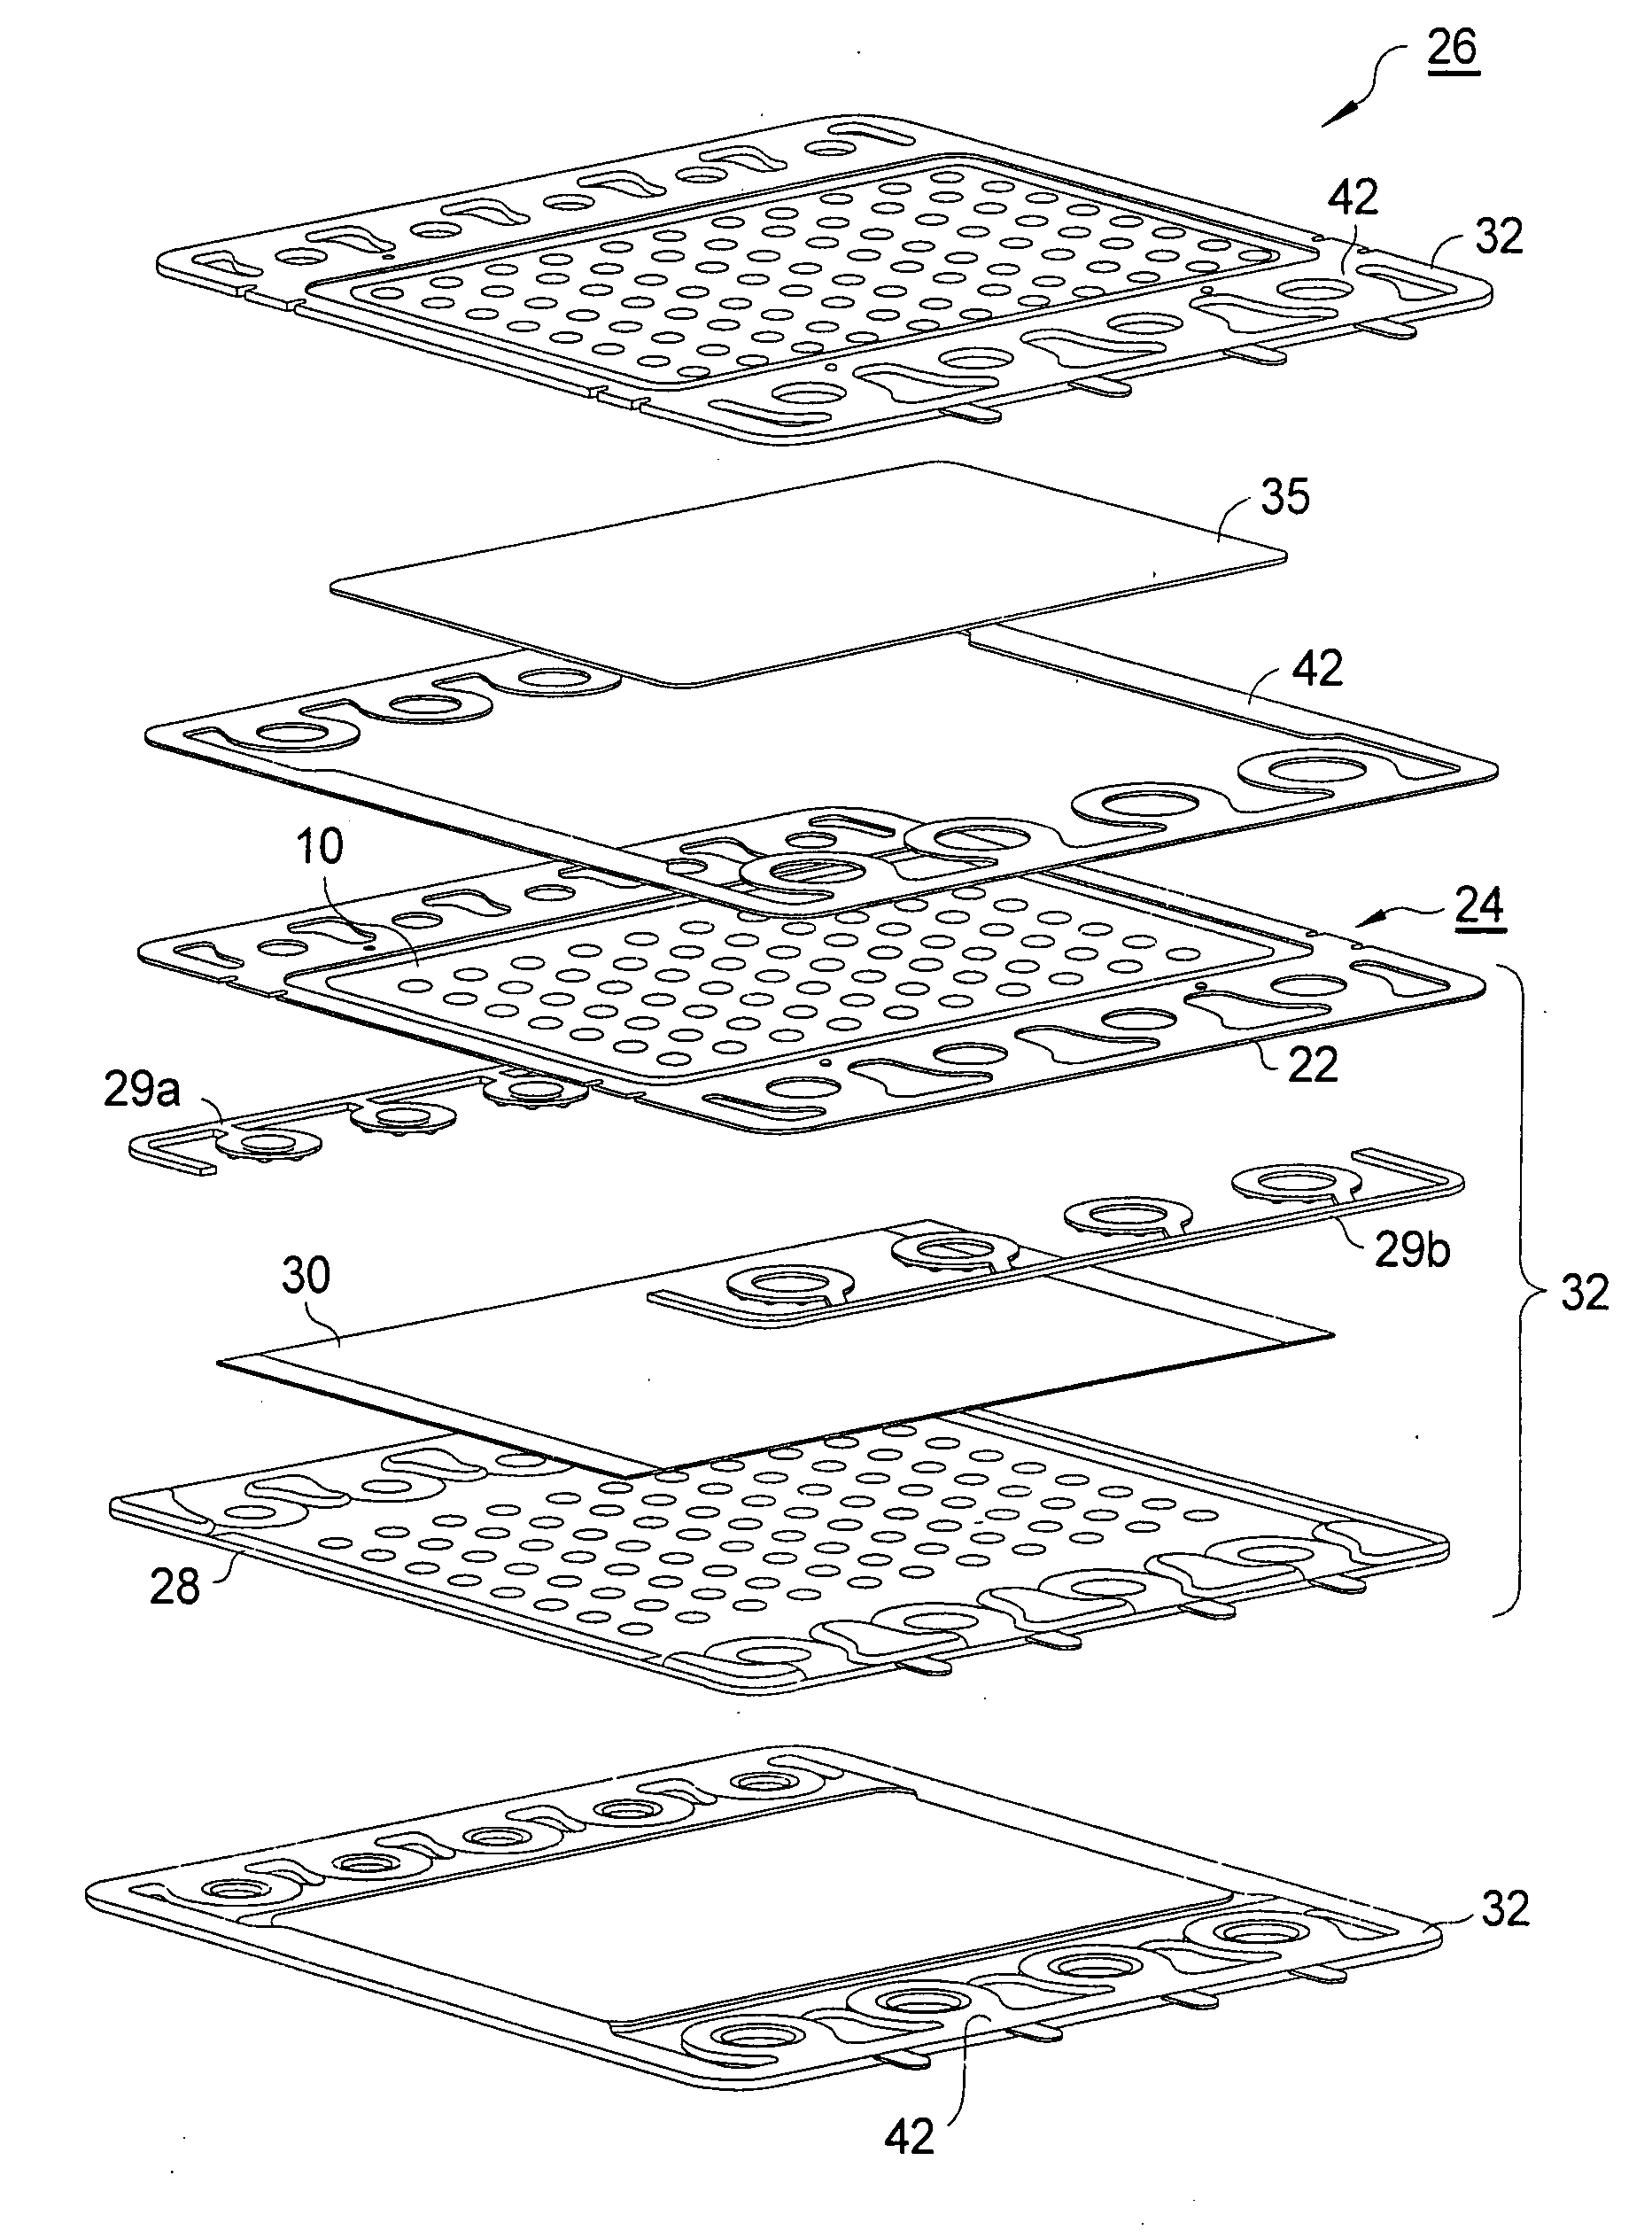 Glass seal with ceramic fiber for a solid-oxide fuel cell stack